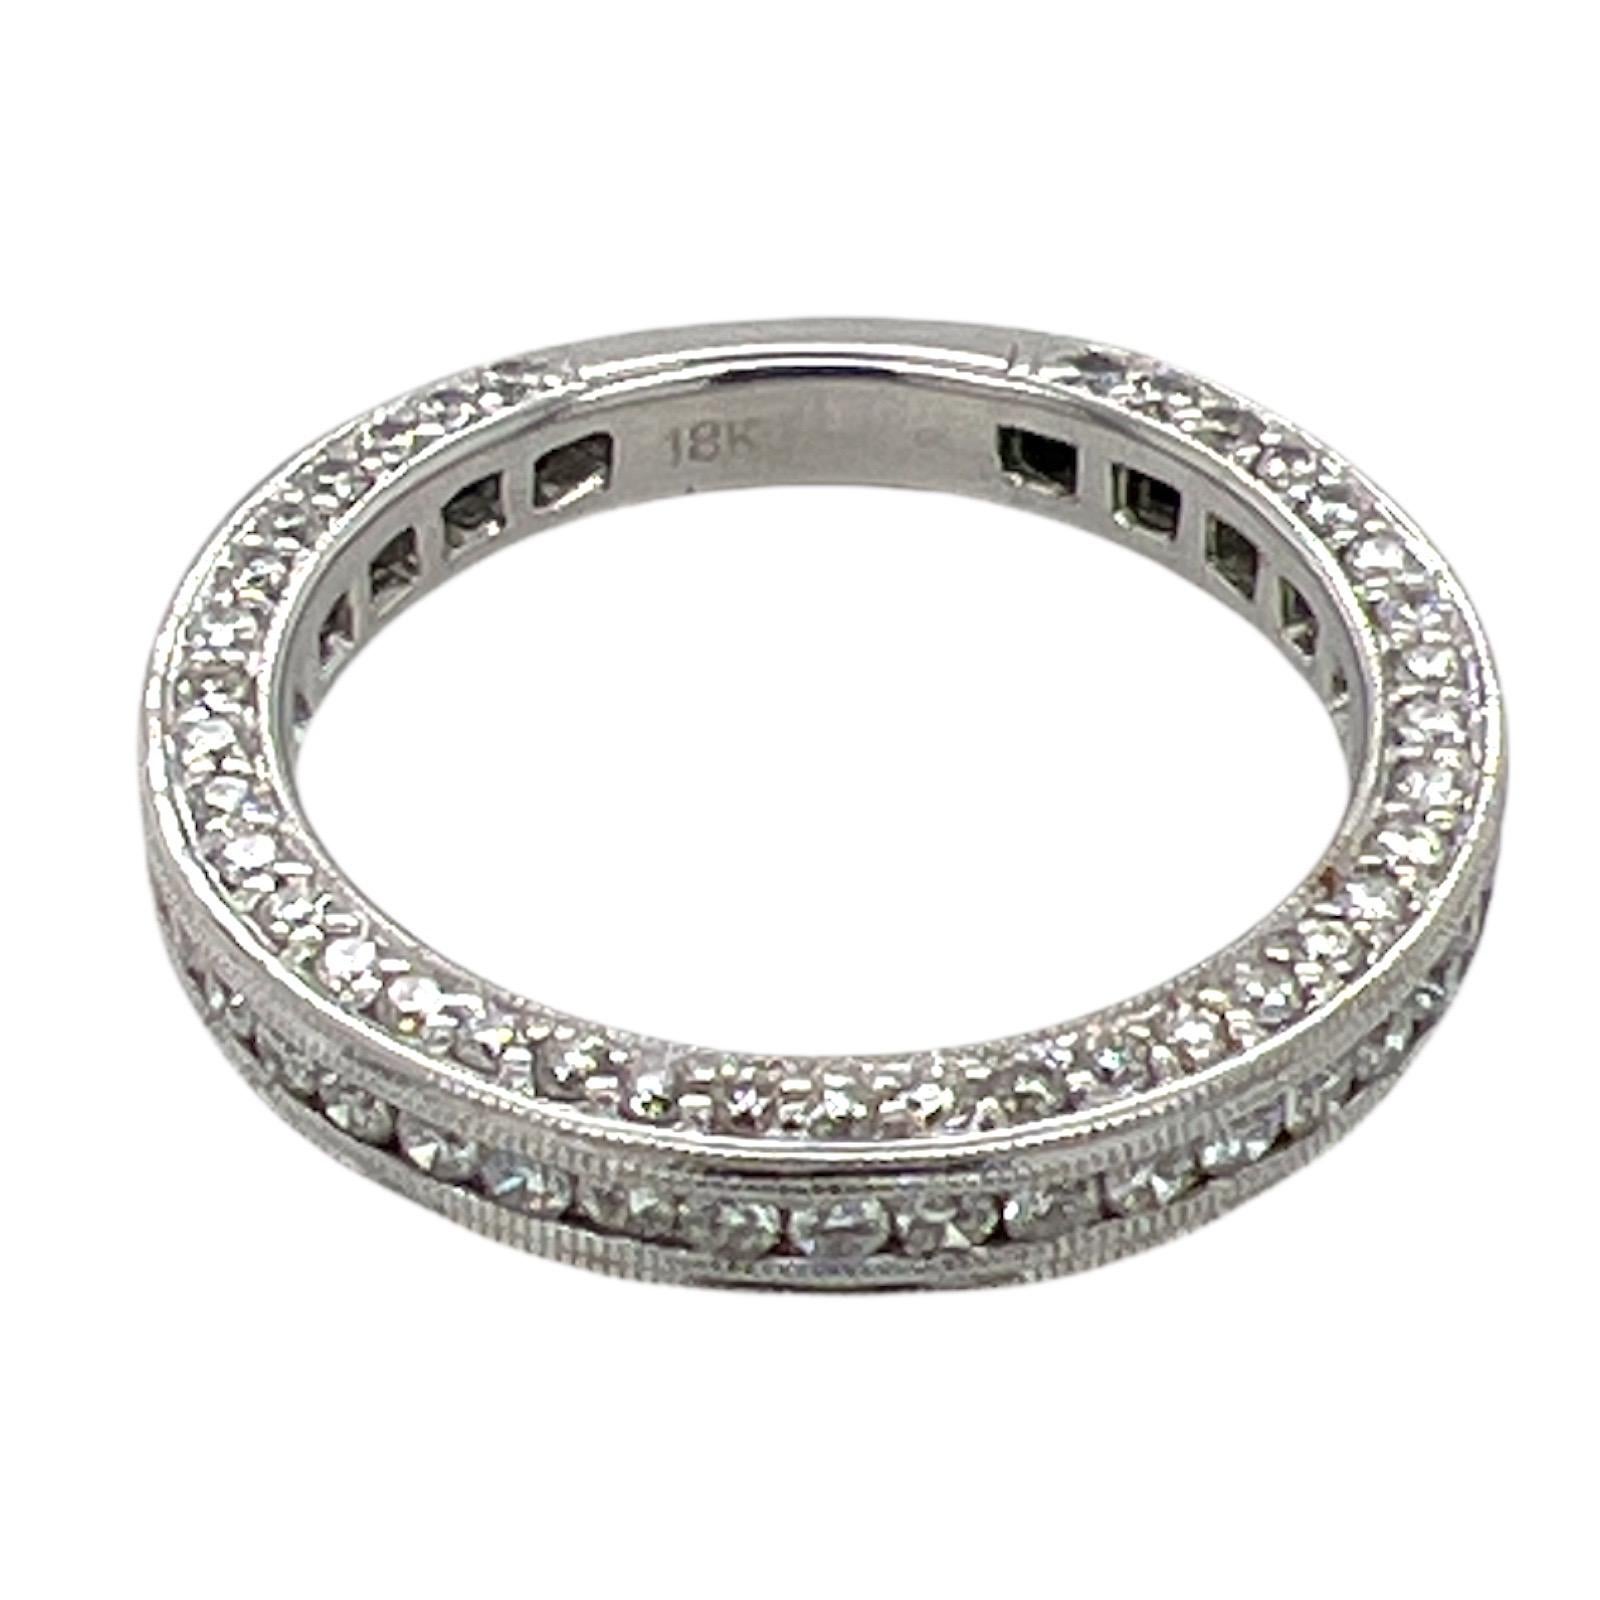 Diamond wedding band fashioned in 18 karat white gold. The ring features round brilliant cut diamonds on three sides of the wedding band weighing .68 carat total weight and graded G-H color and SI clarity. The diamonds are set 3/4 of the way around